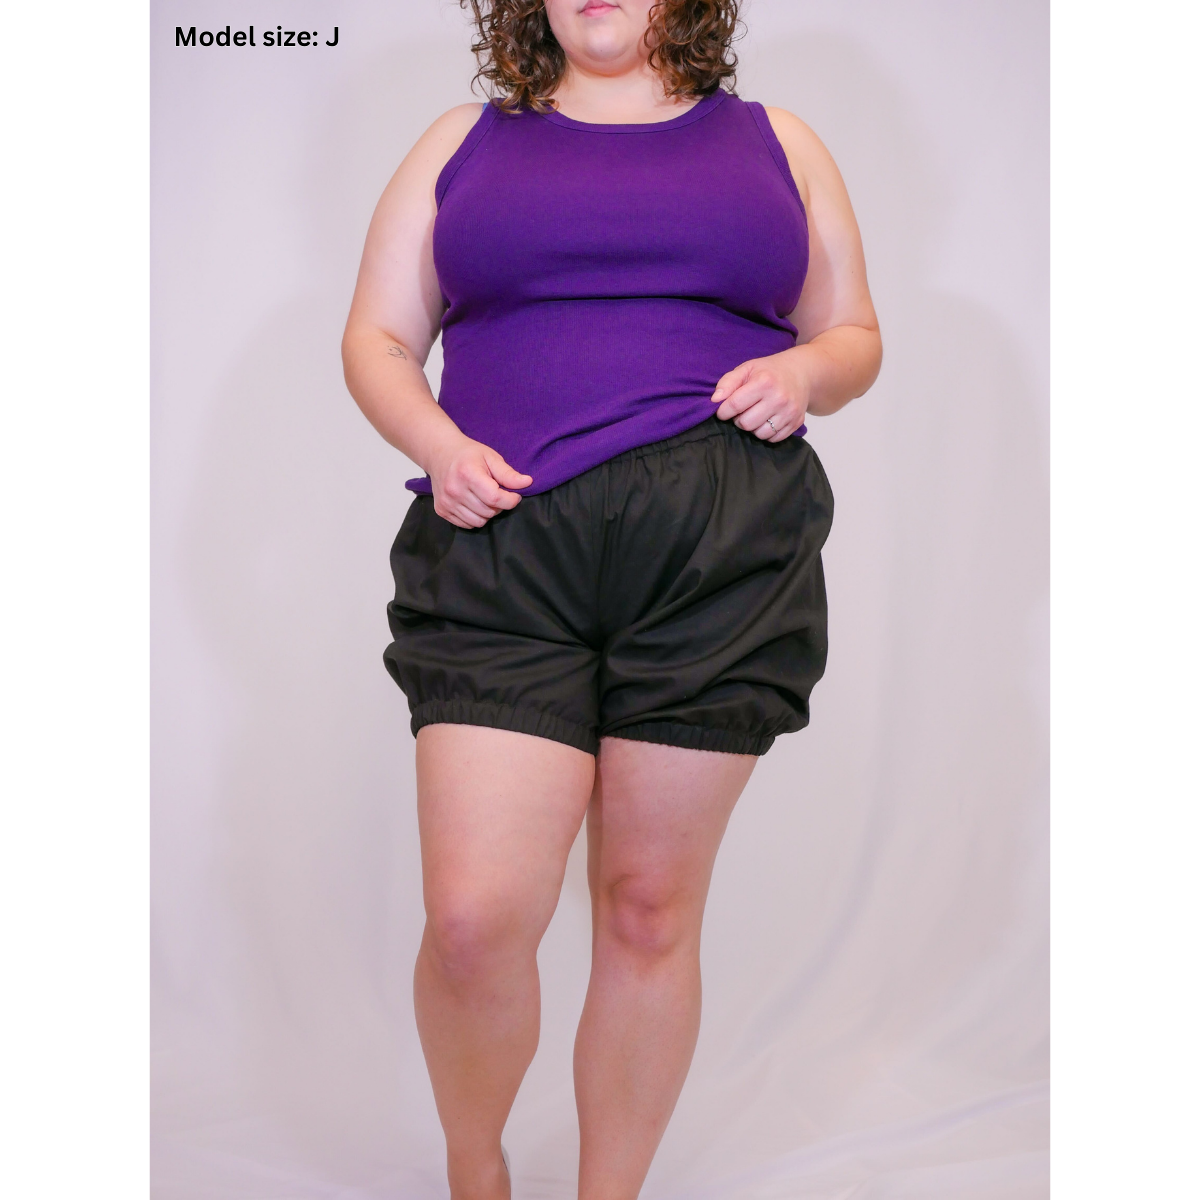 A photo of a woman in black short bloomers (size J) with a purple tank top.